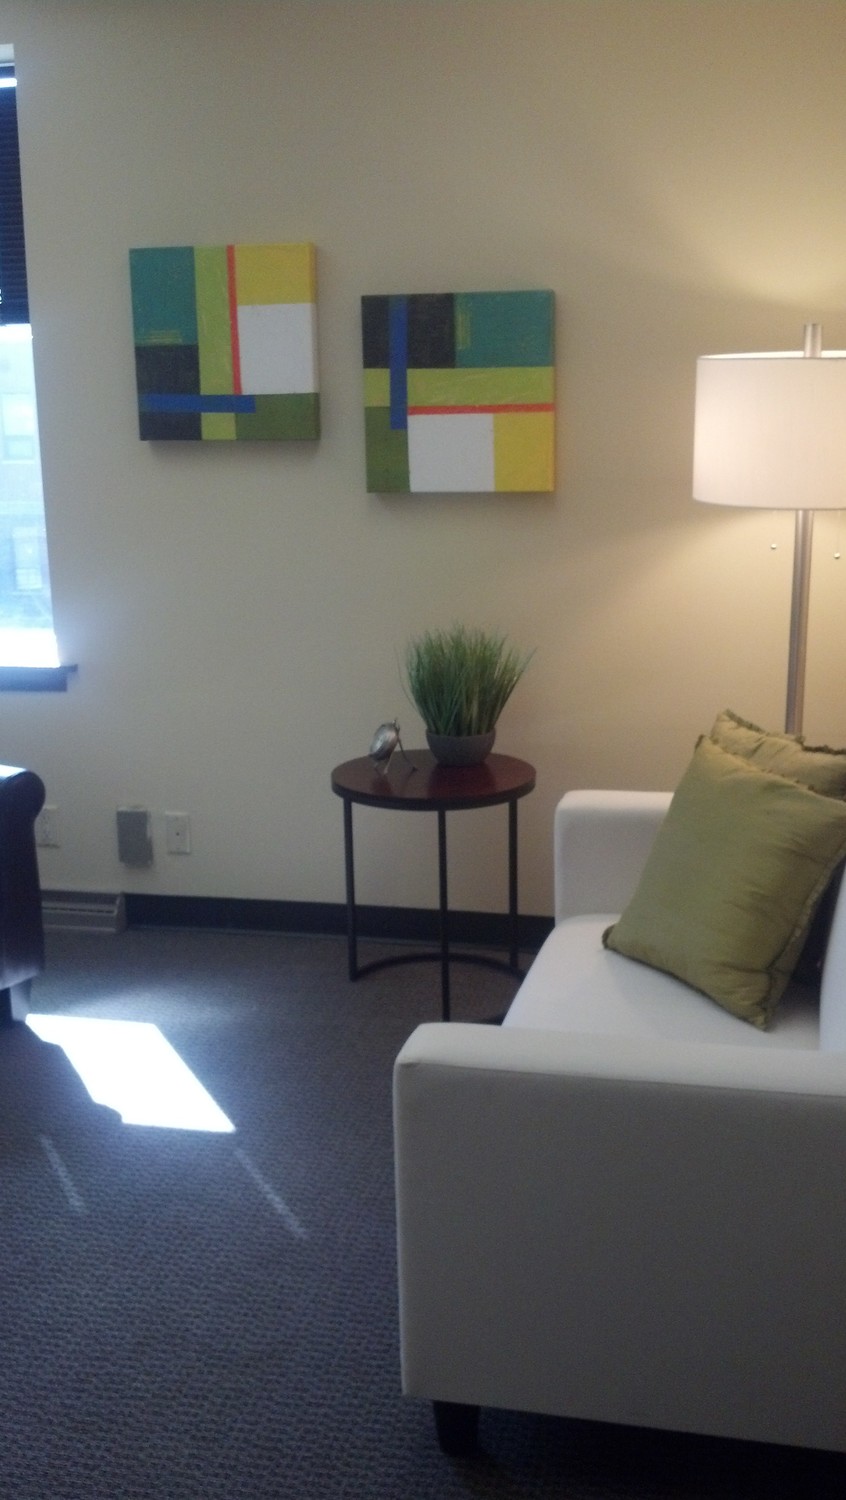 Gallery Photo of Empath Counseling office